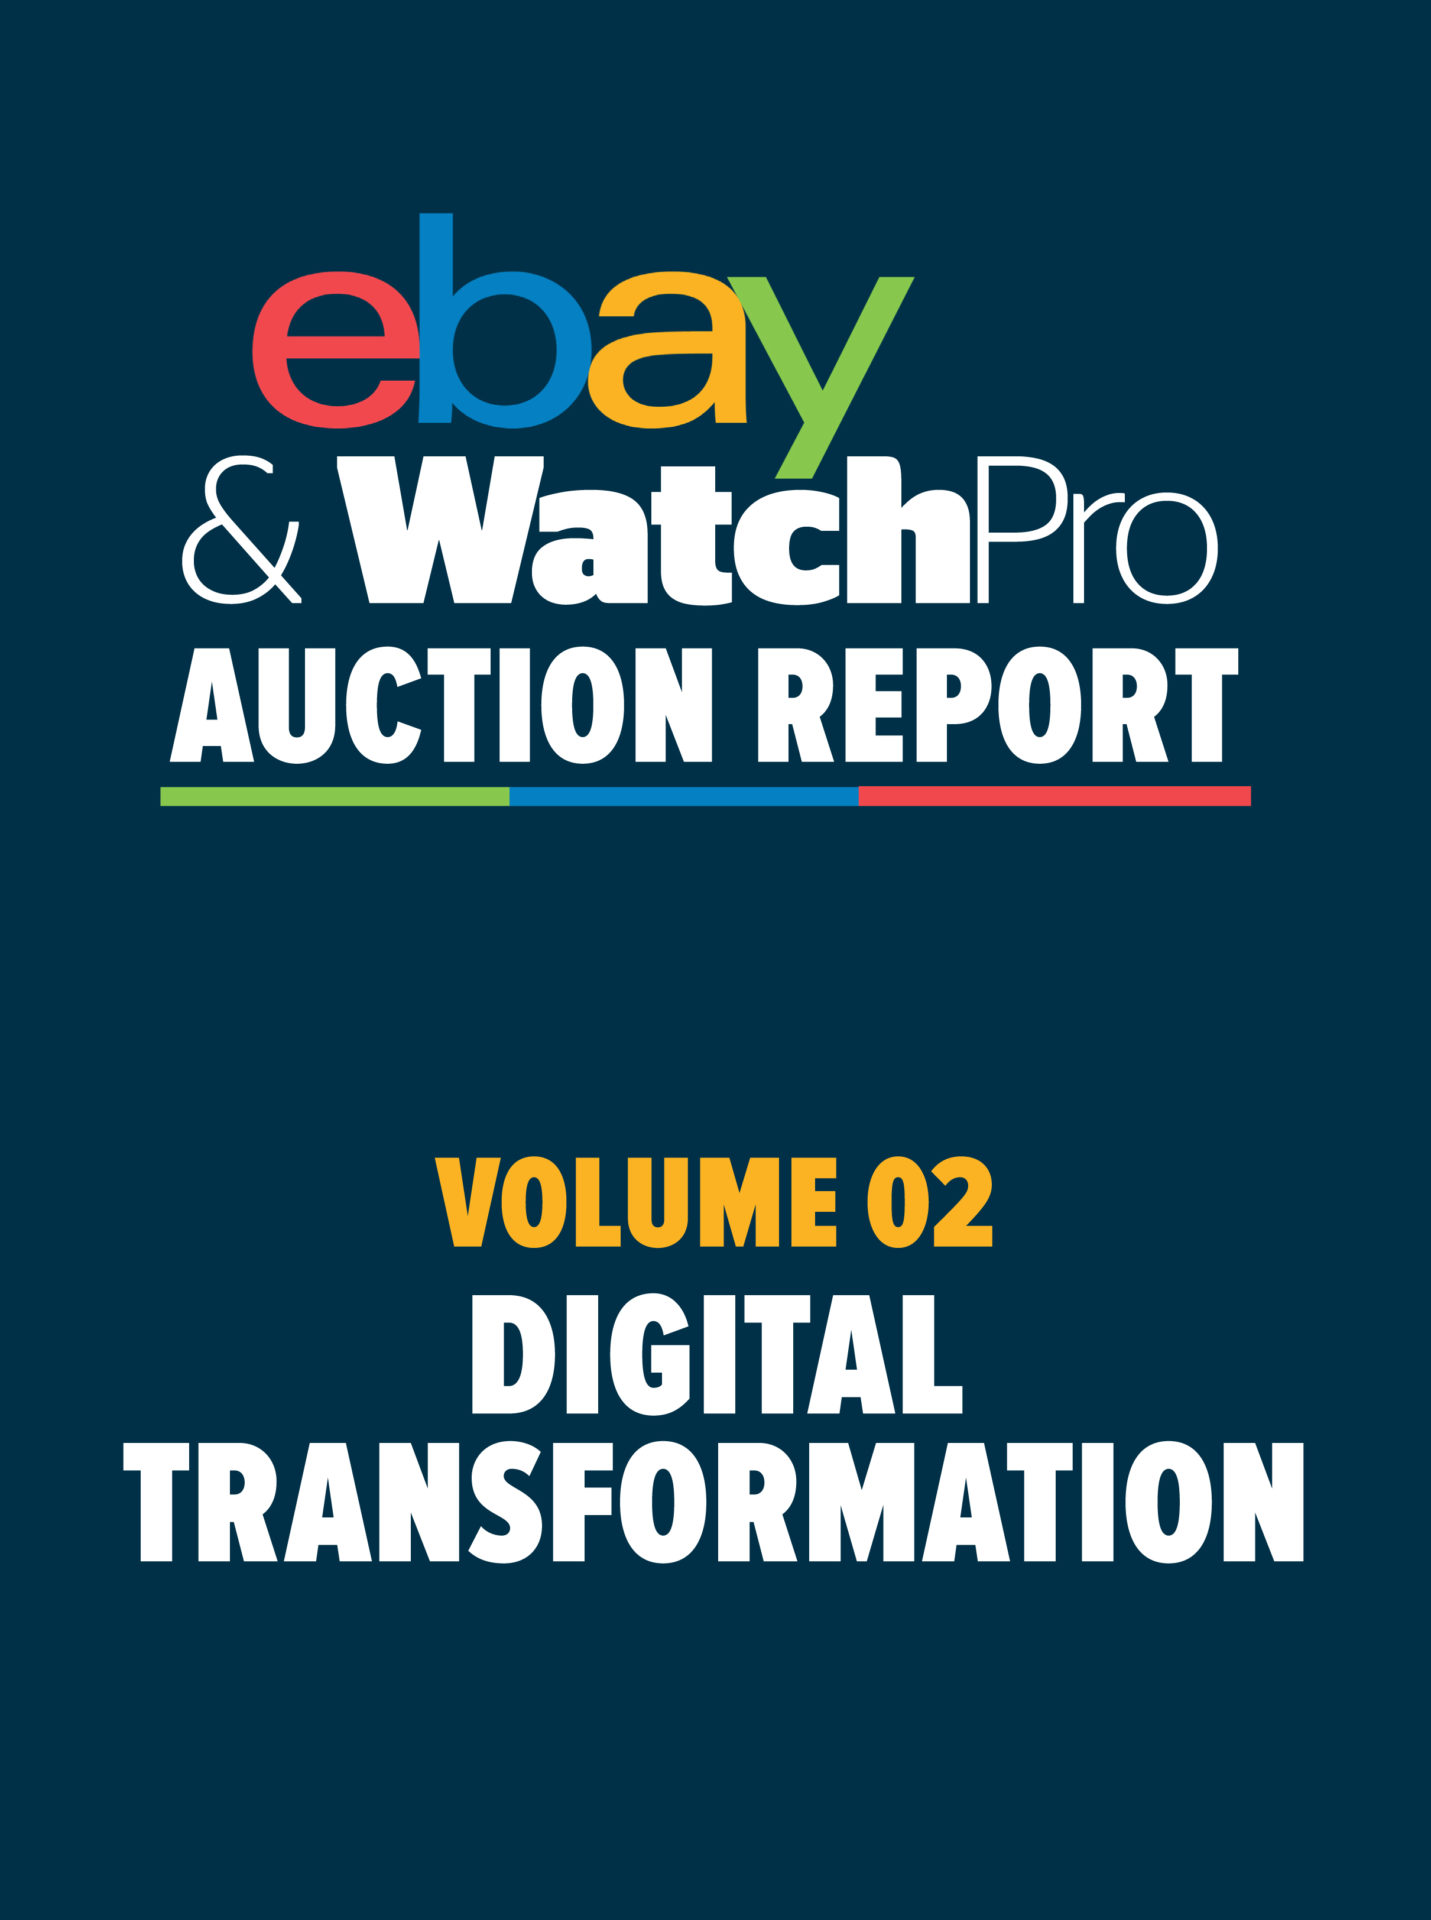 Ebay auction special report volume 2 cover